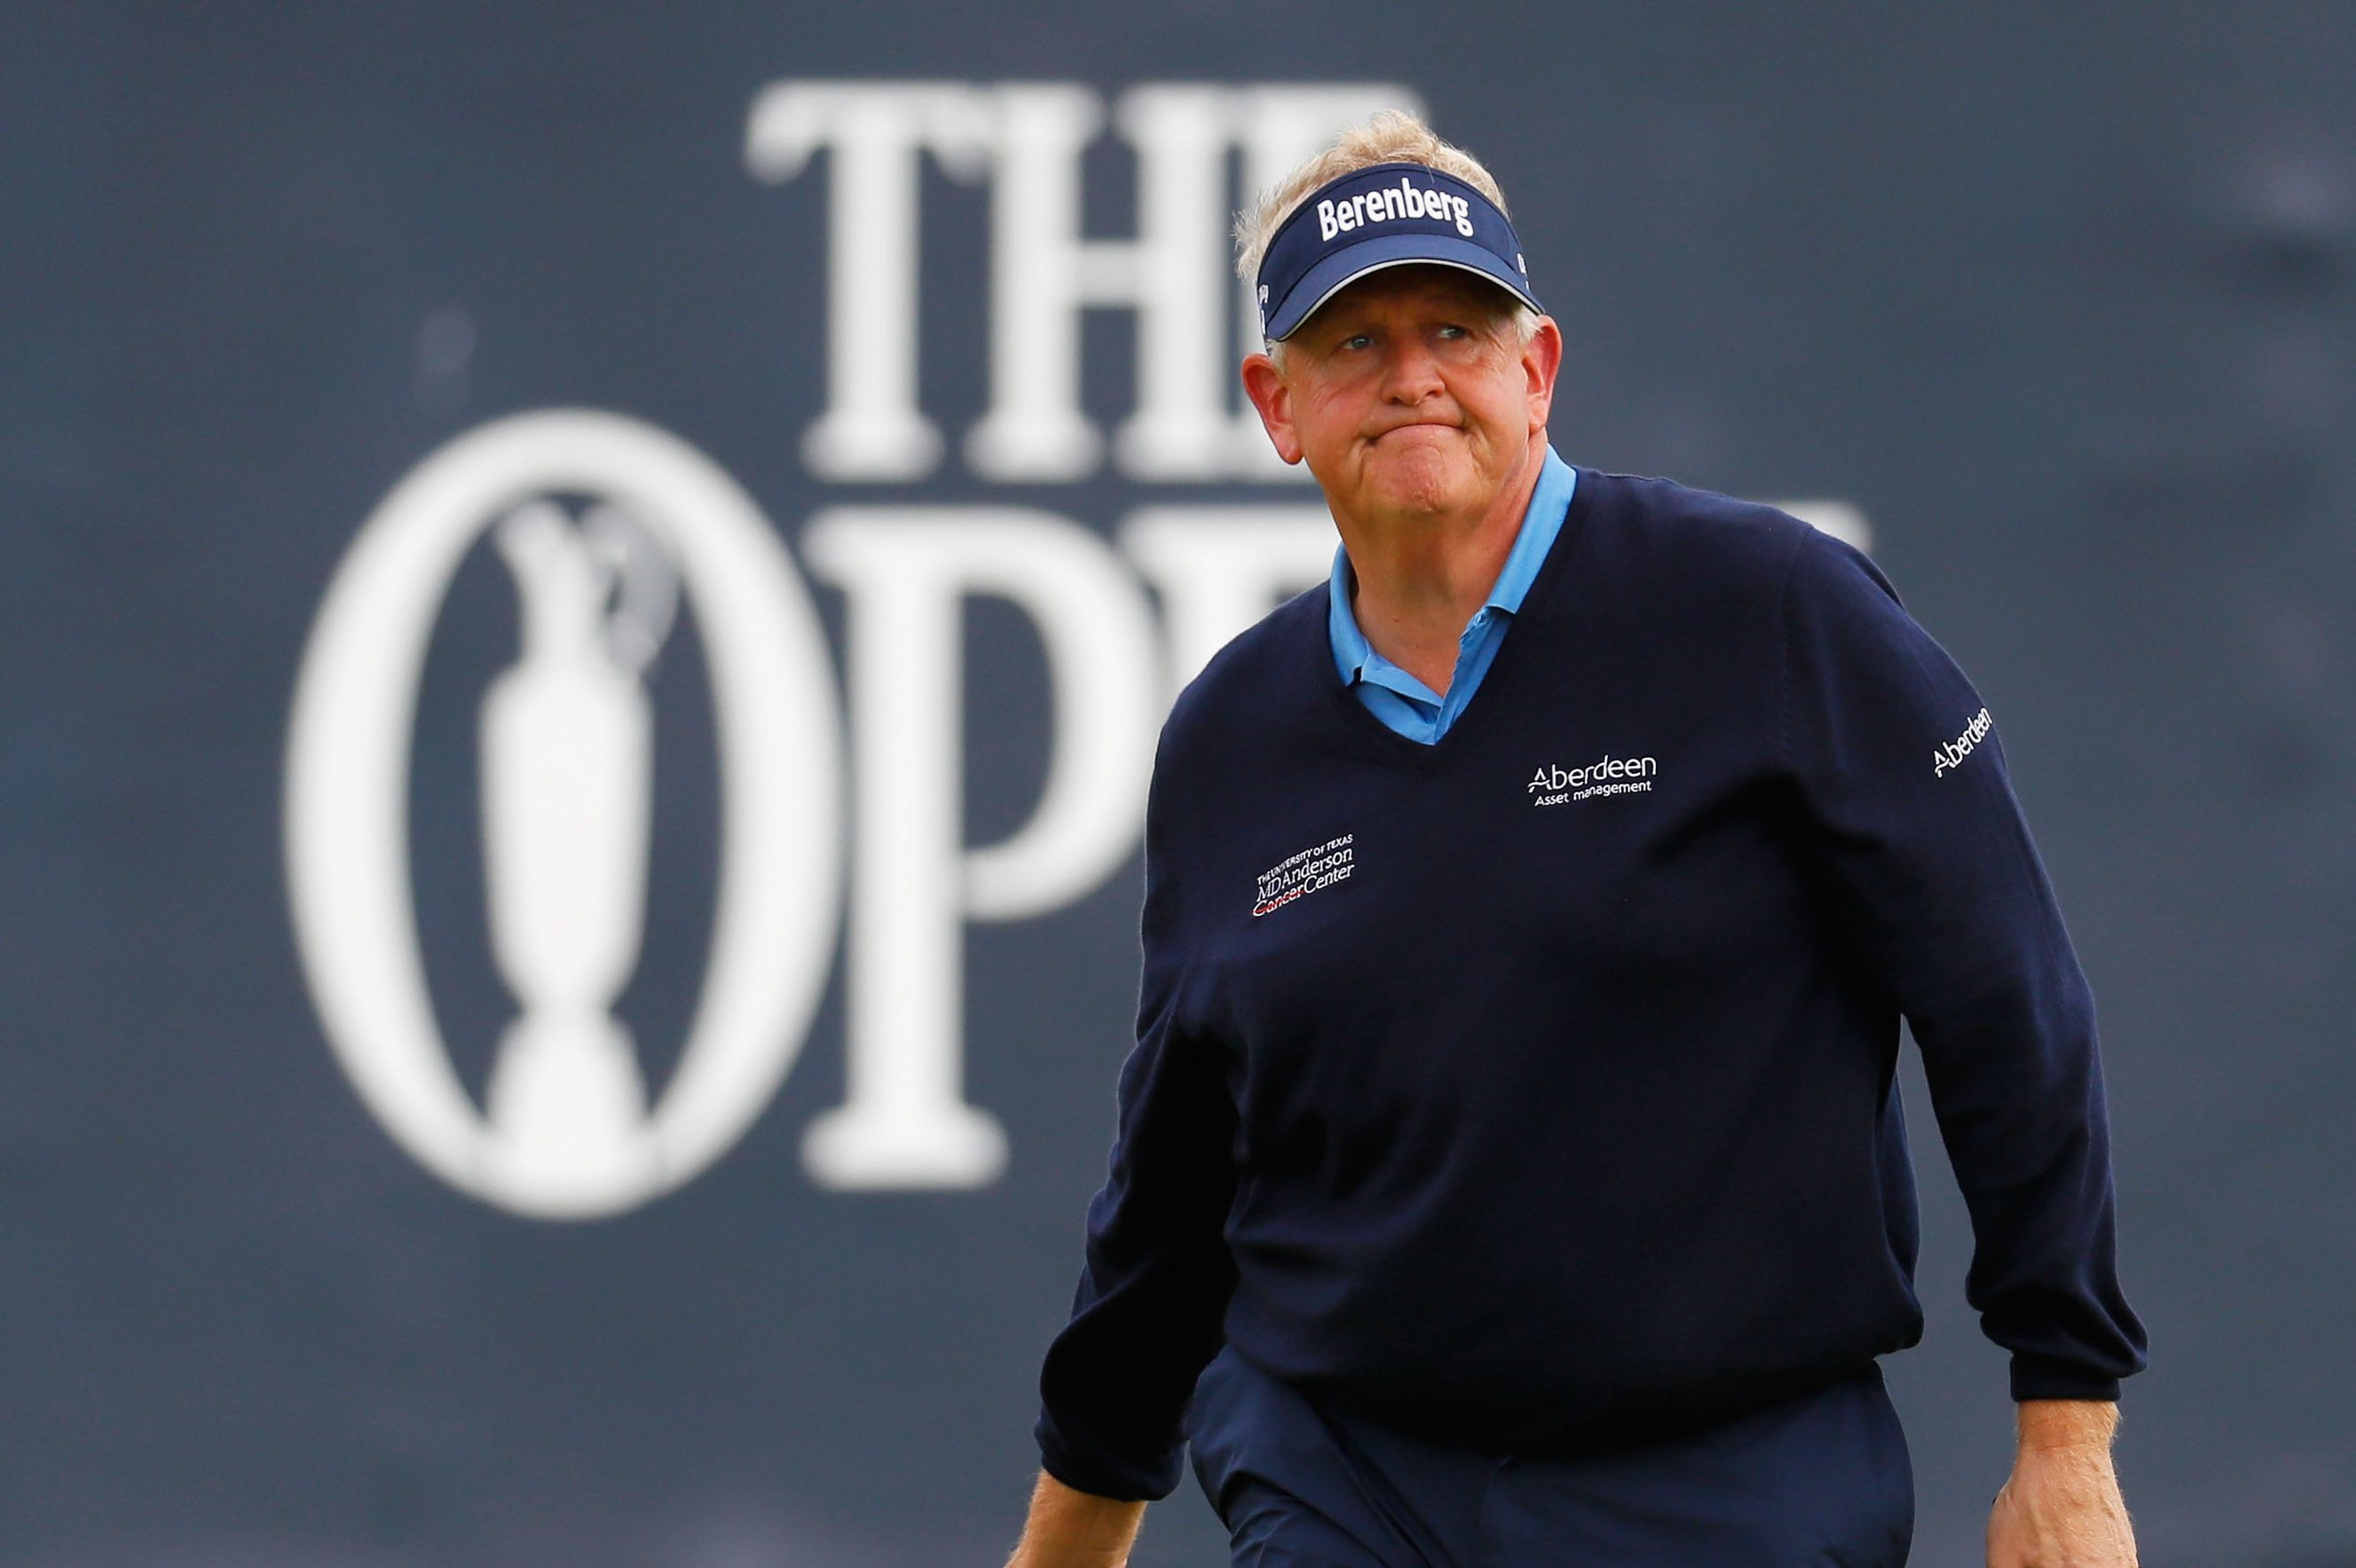 Colin Montgomerie reacts on the 18th green after playing what he thought was his last shot of The Open.